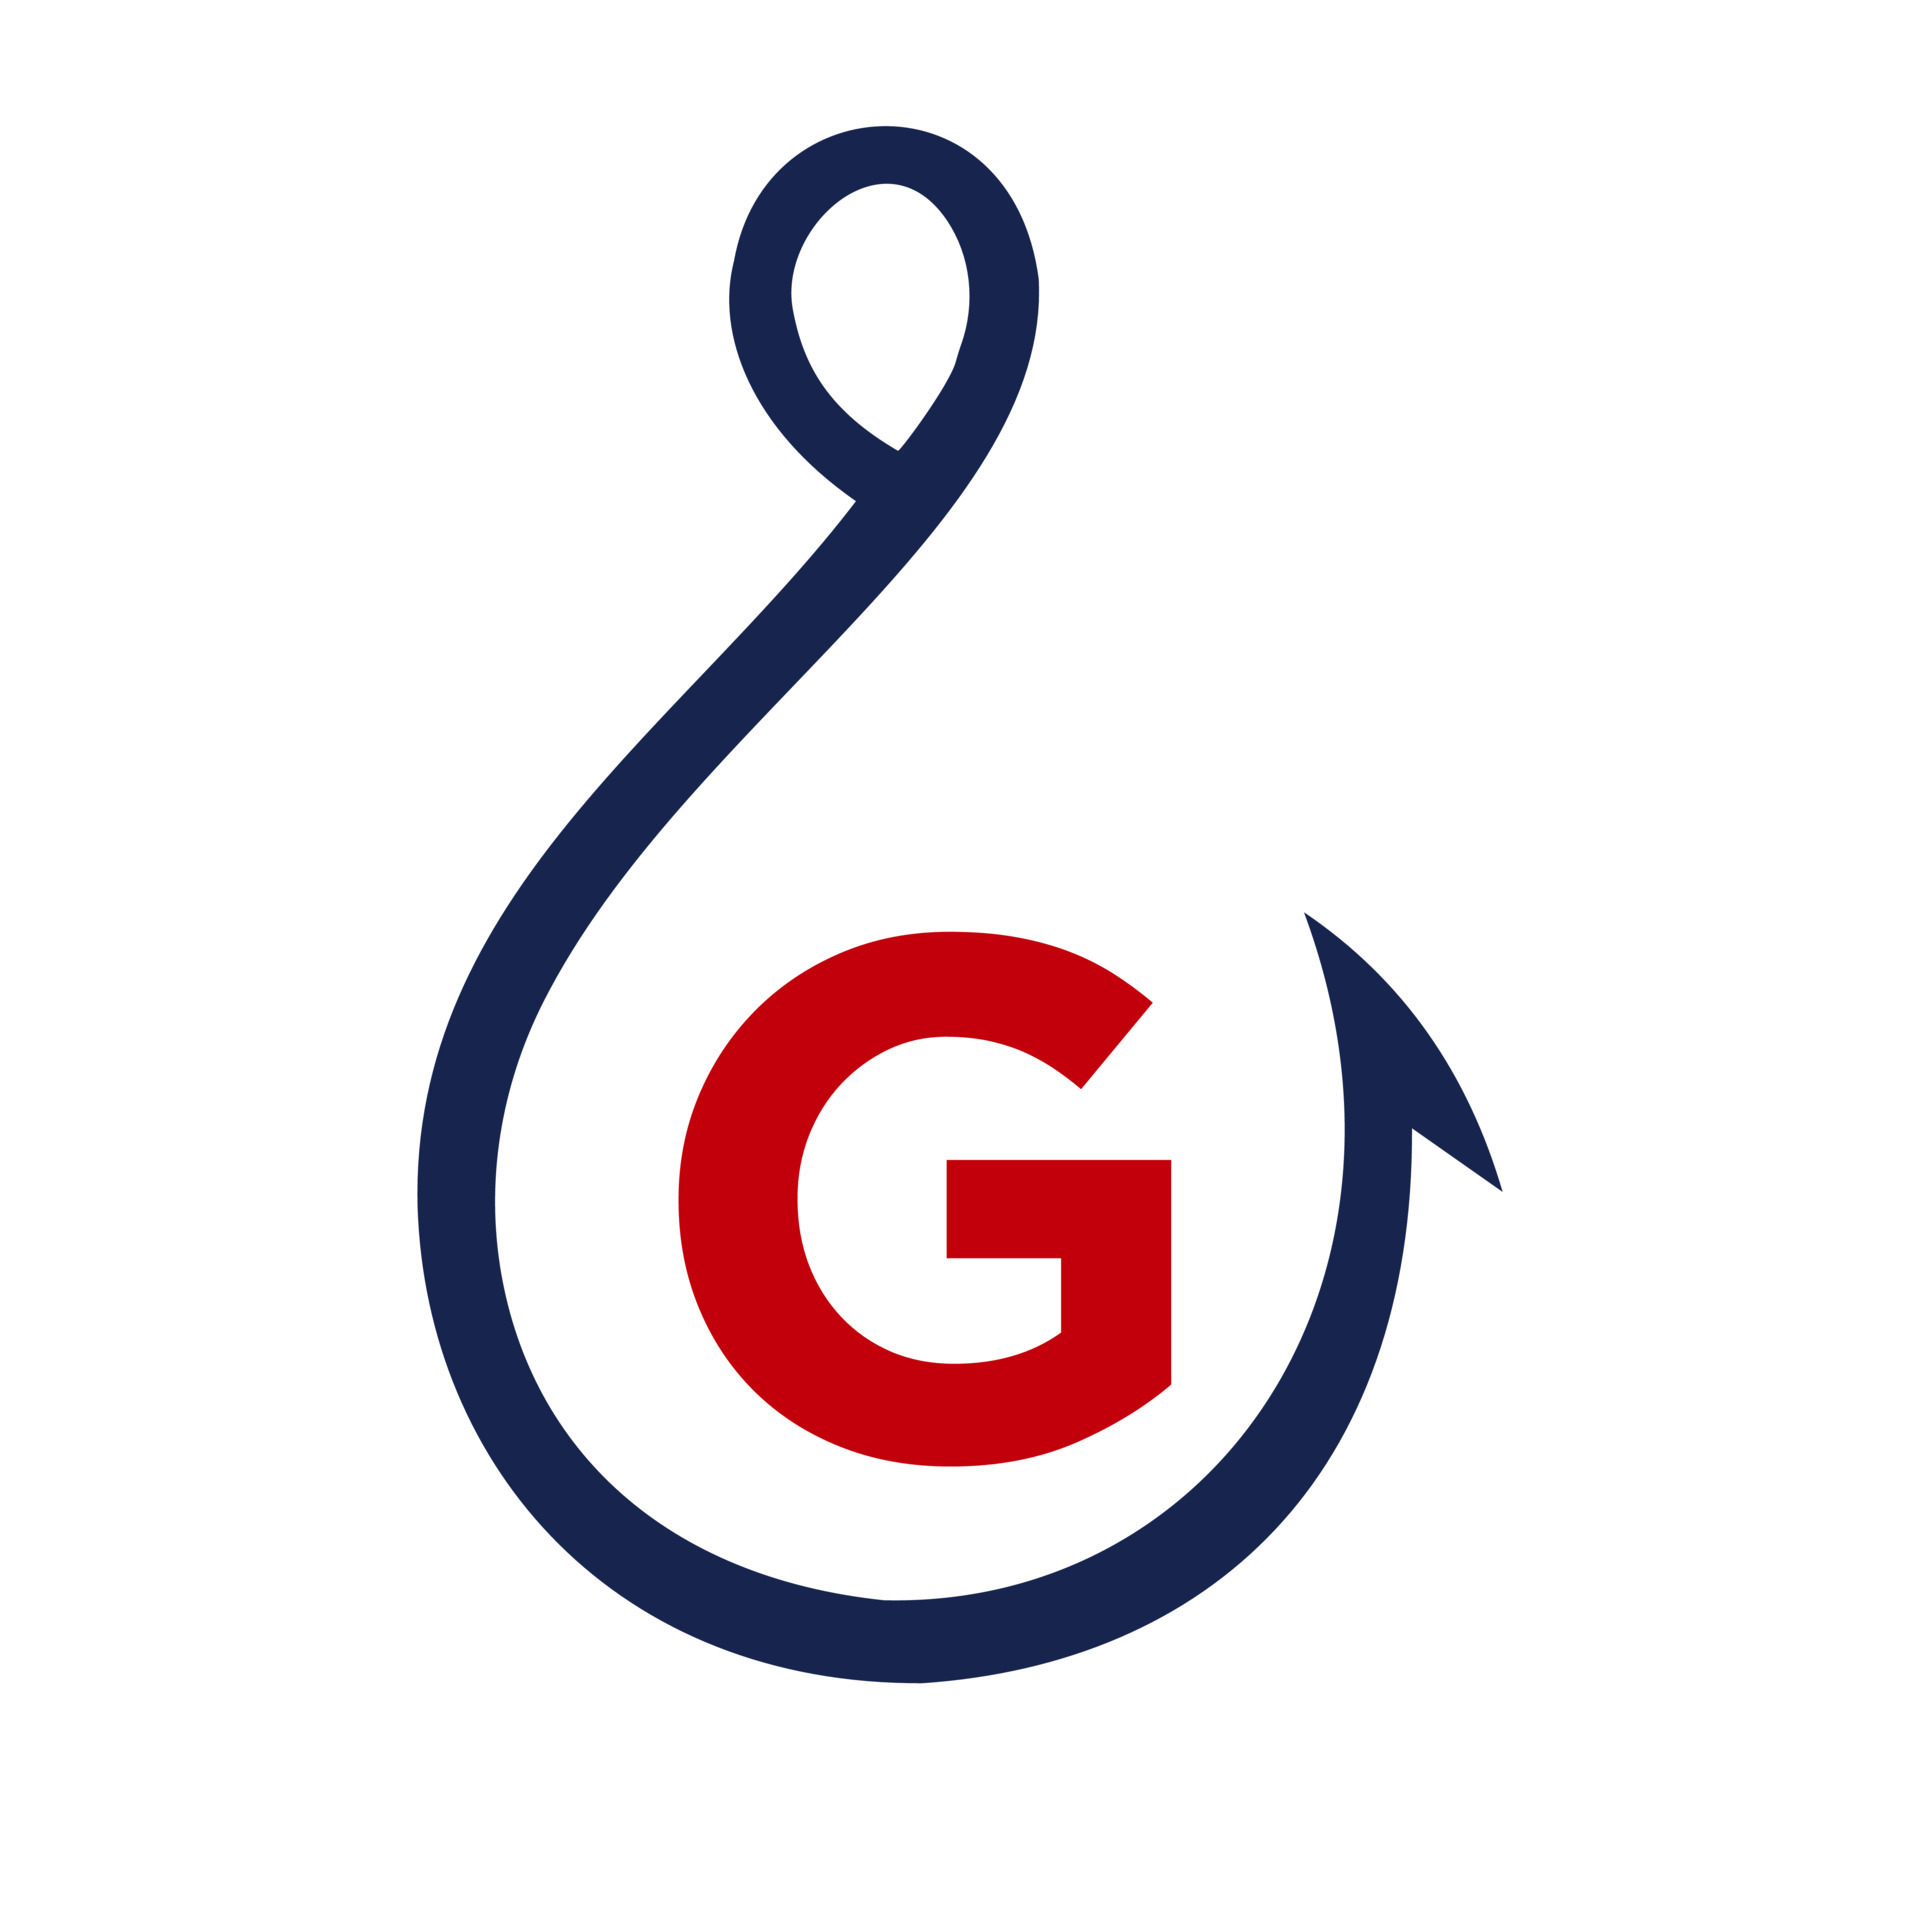 https://static.vecteezy.com/system/resources/previews/017/764/954/original/fishing-logo-on-letter-g-sign-fishing-hook-logo-template-free-vector.jpg